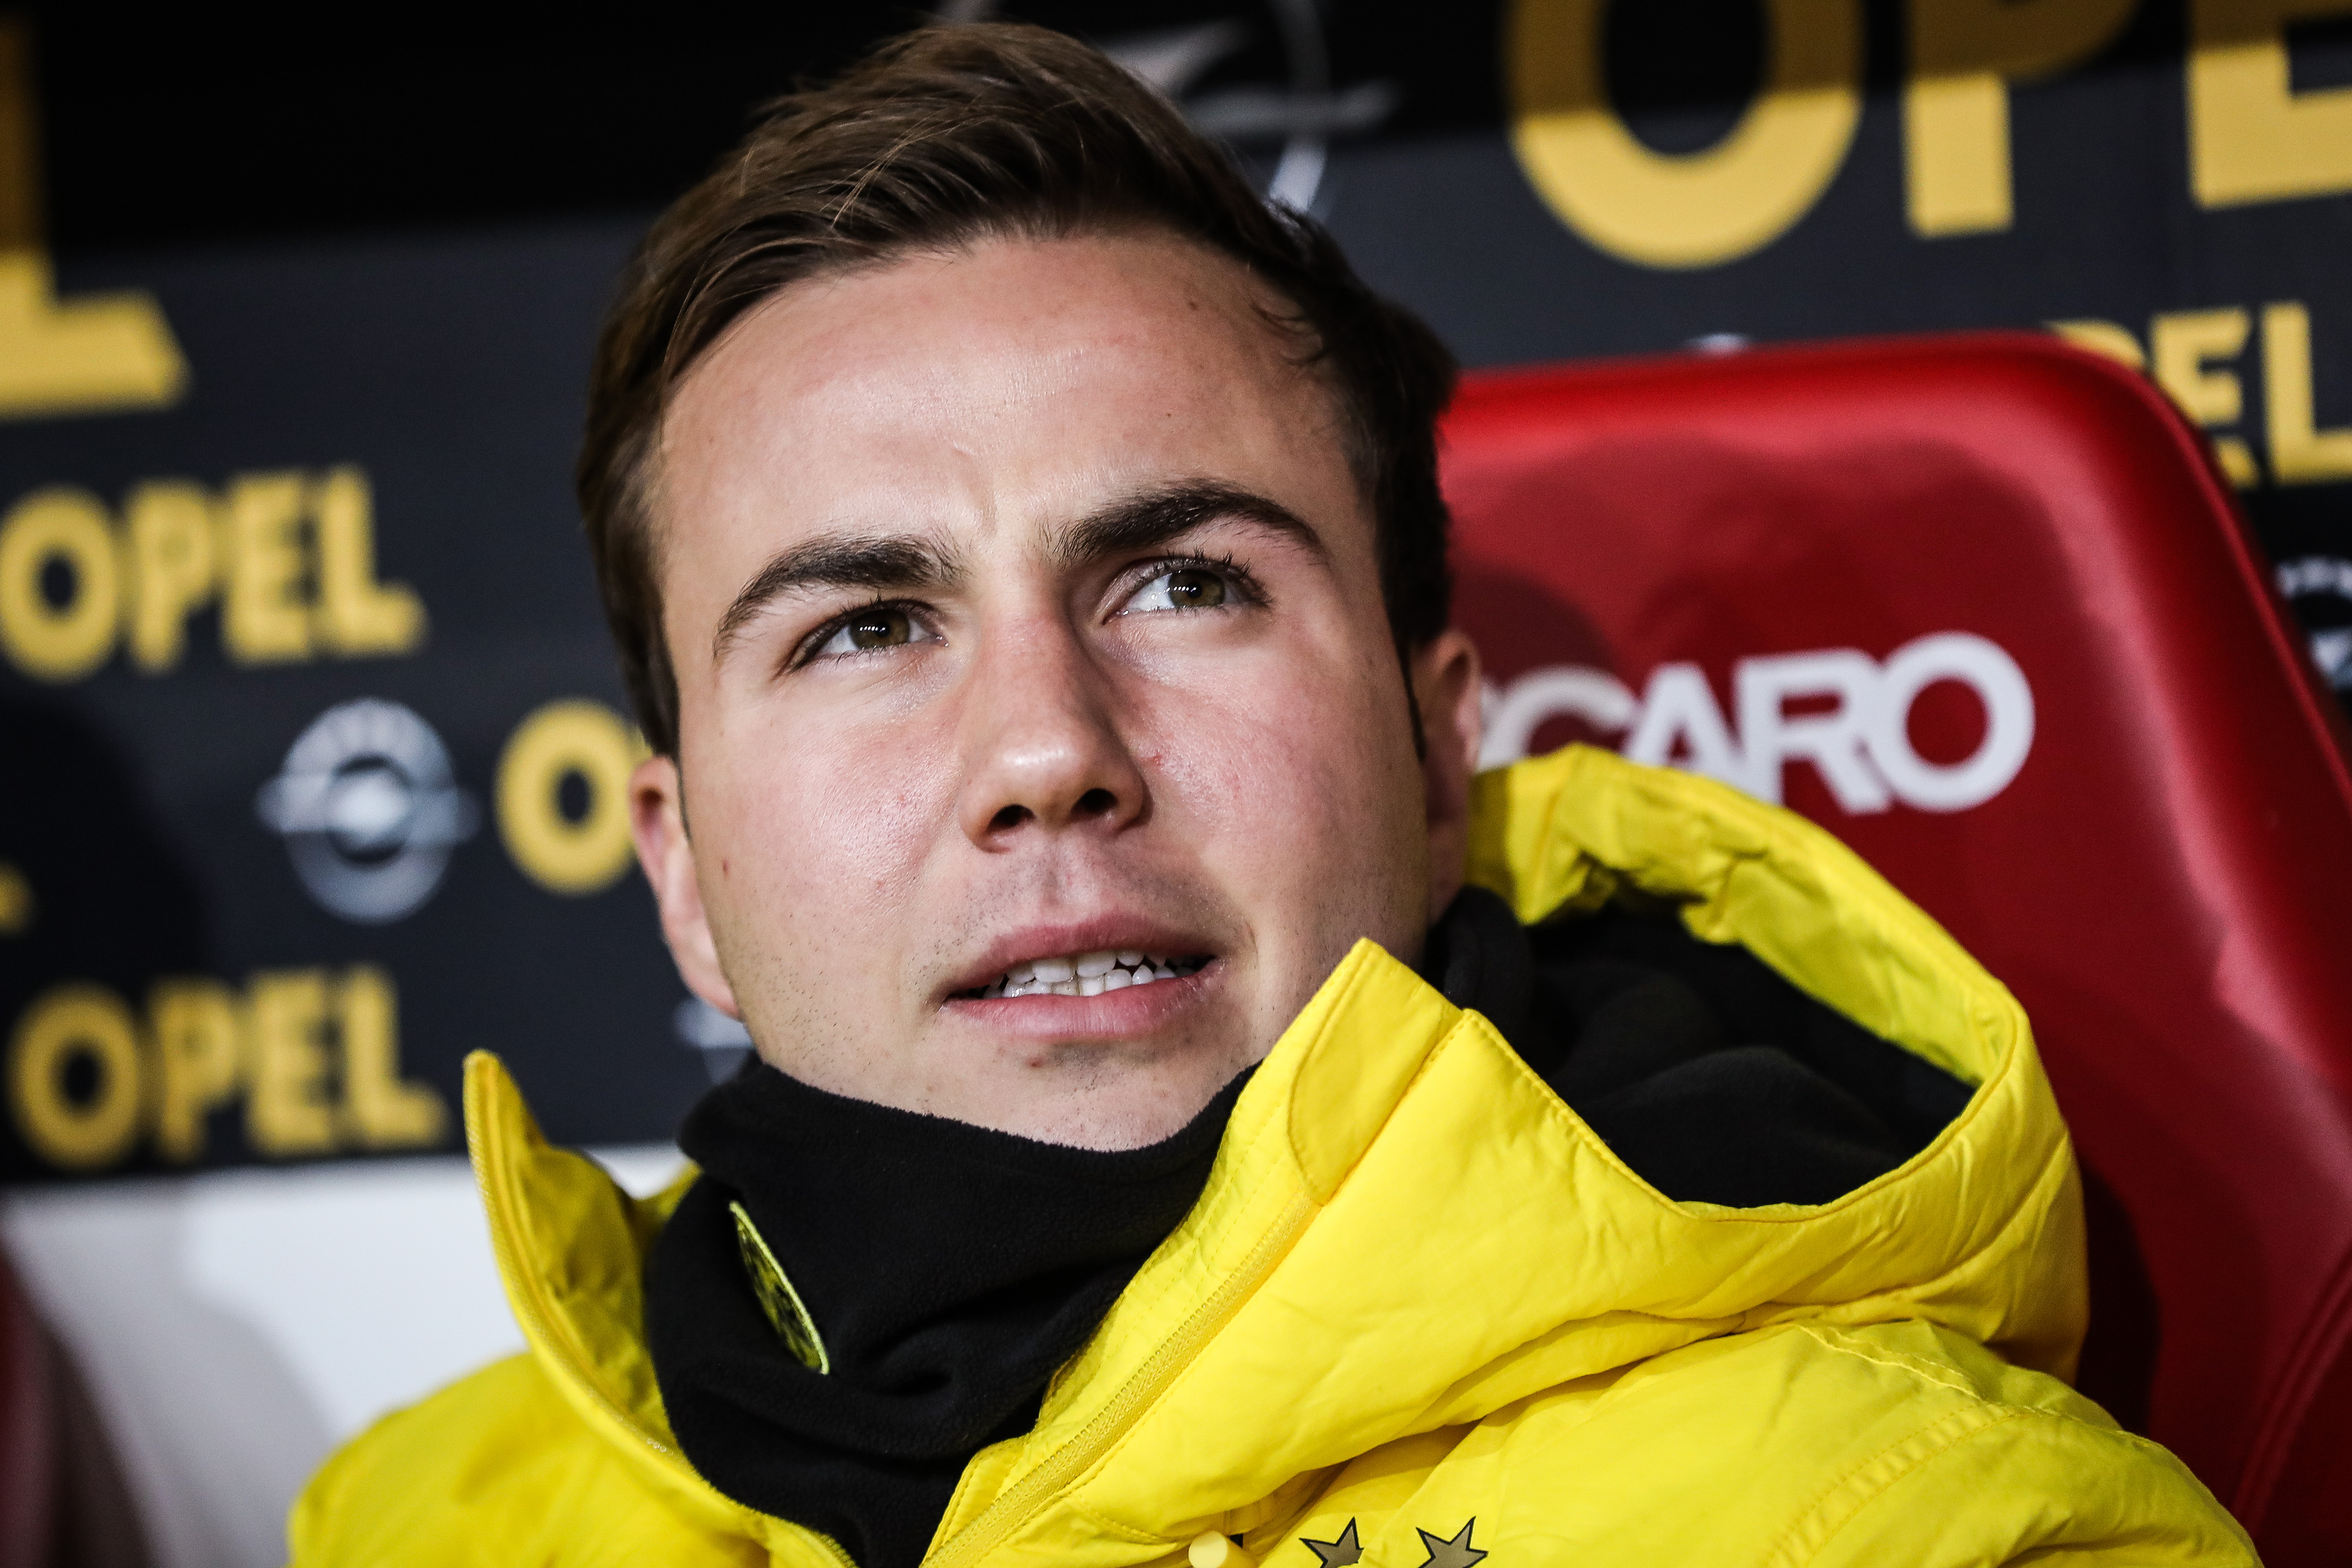 MAINZ, GERMANY - JANUARY 29: Mario Goetze of Dortmund sits on the bench during the Bundesliga match between 1. FSV Mainz 05 and Borussia Dortmund at Opel Arena on January 29, 2017 in Mainz, Germany. (Photo by Maja Hitij/Bongarts/Getty Images)